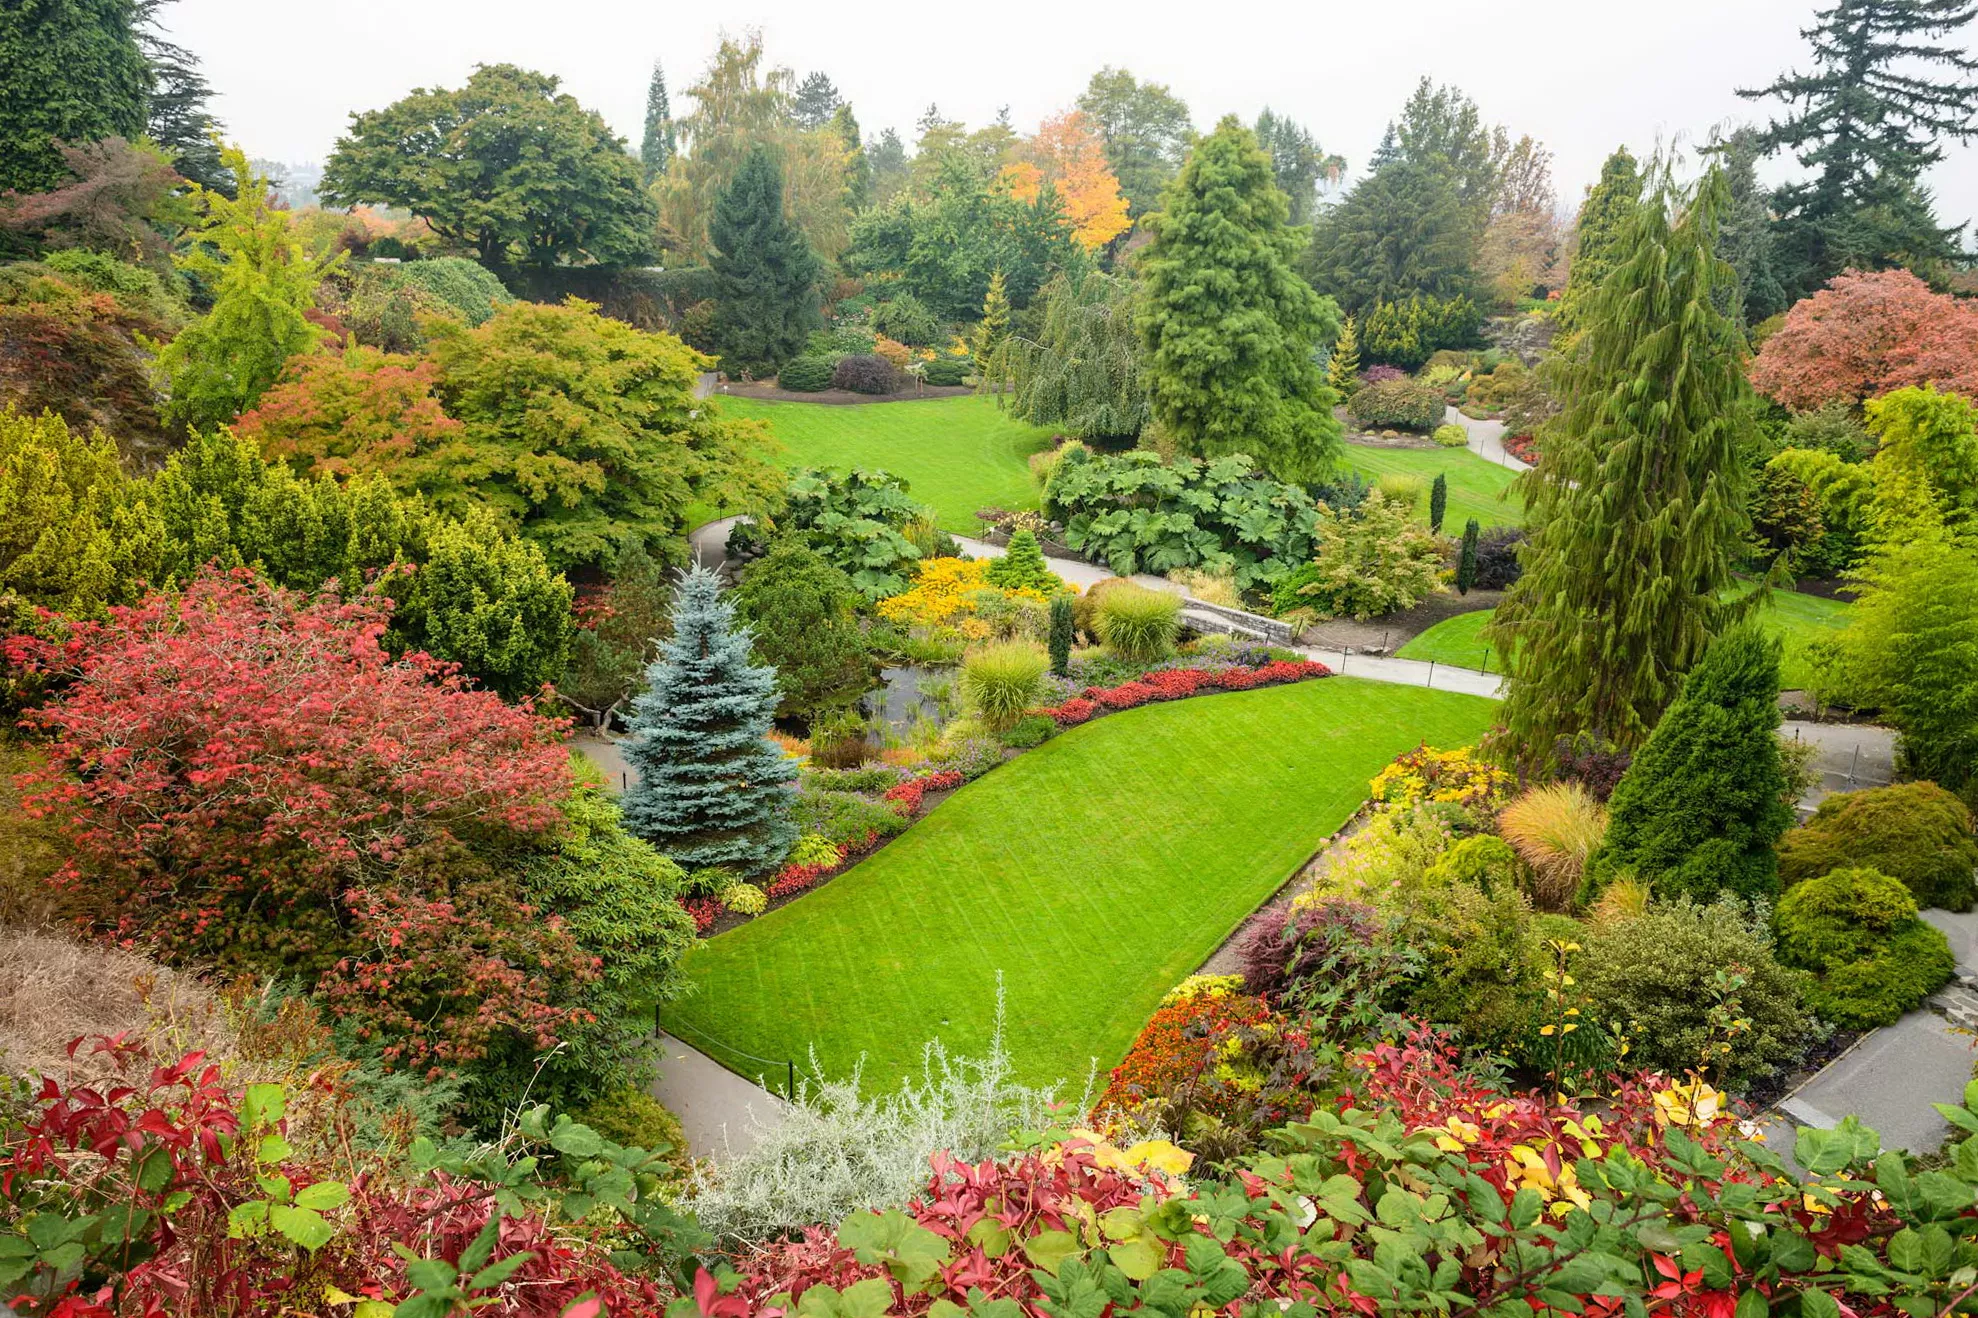 Queen Elizabeth Park in Canada, North America | Parks - Rated 3.7